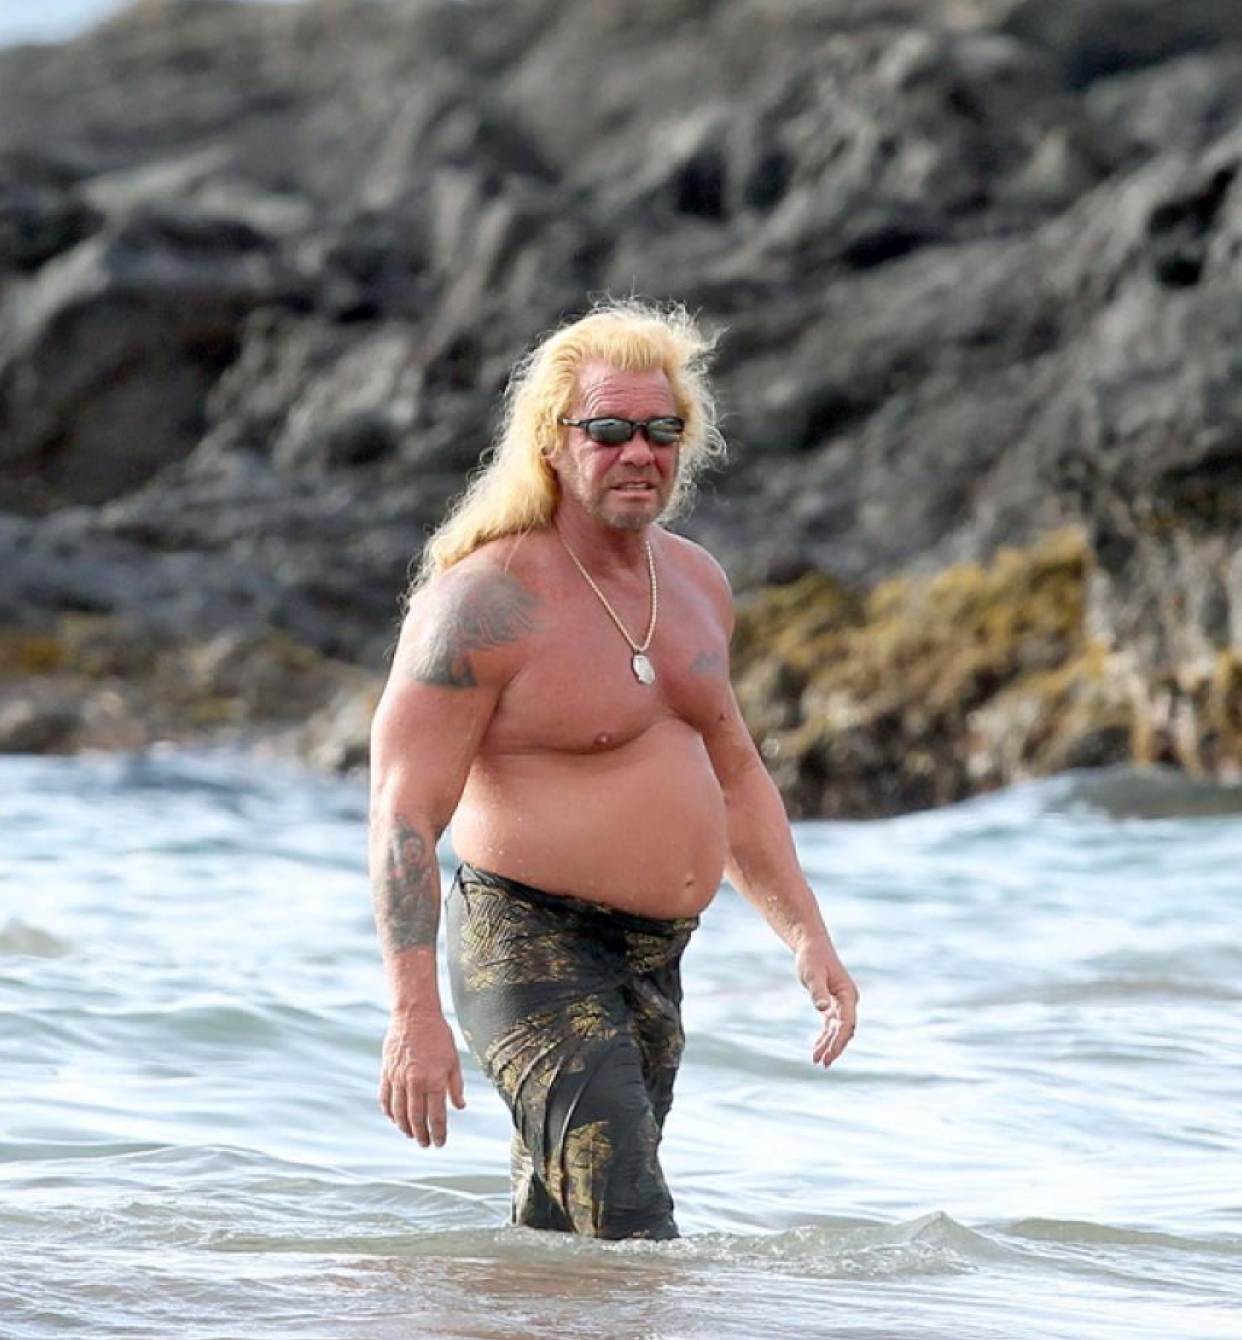 Dog The Bounty Hunter Pics, TV Show Collection